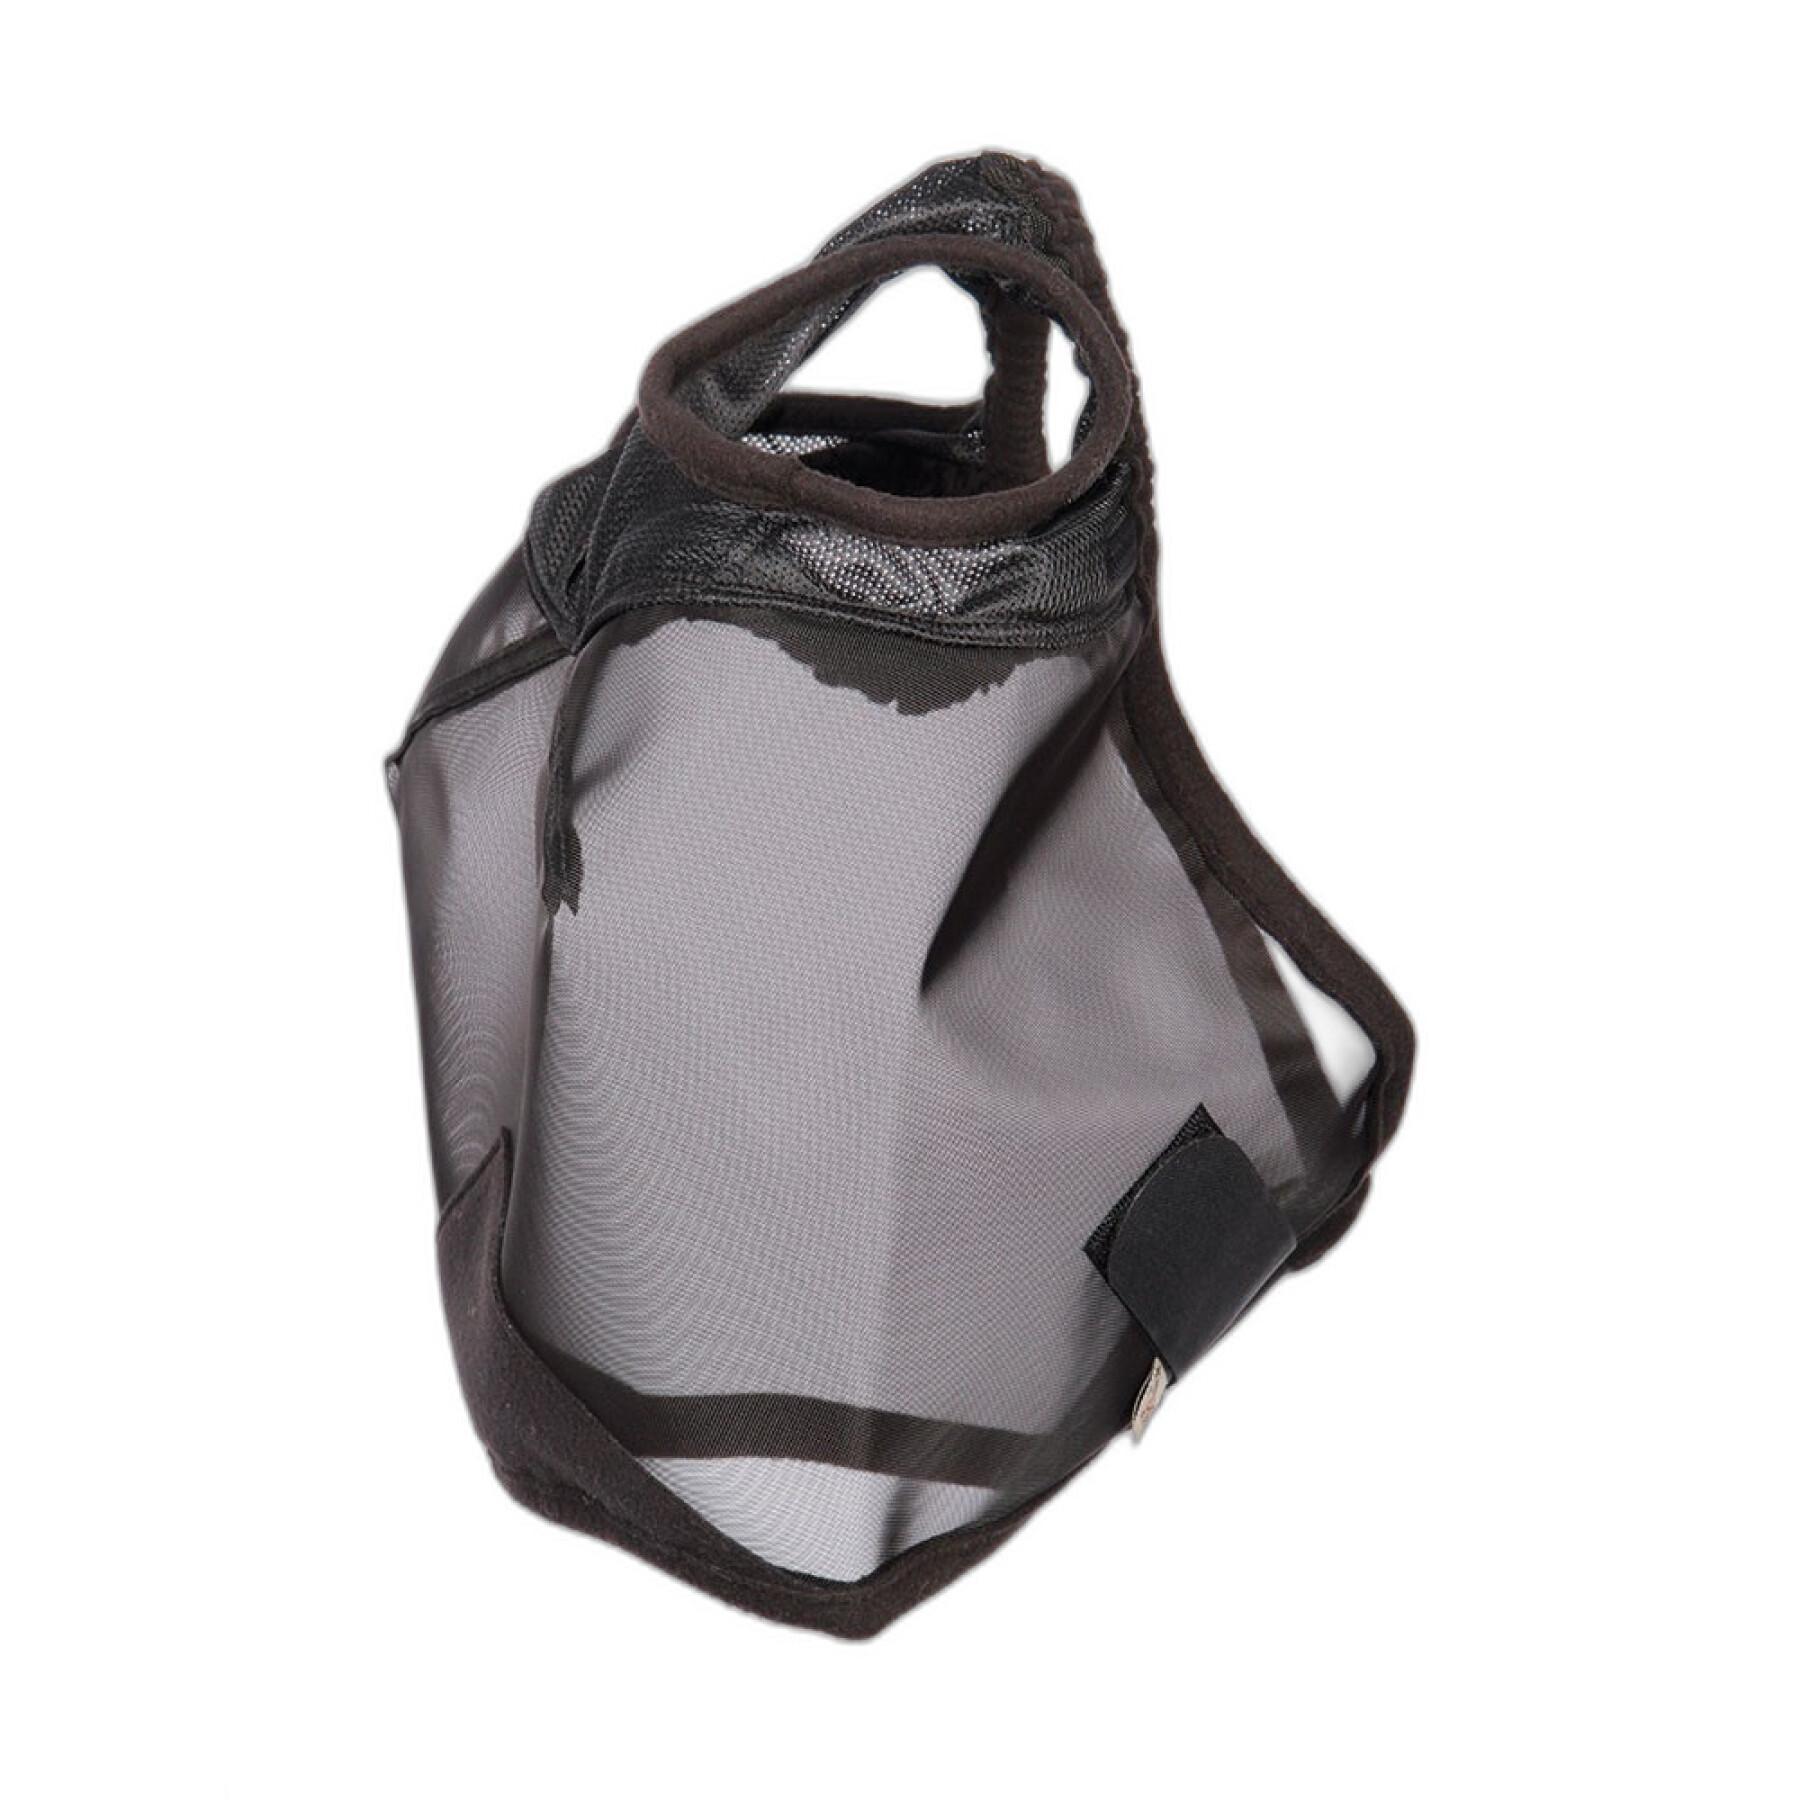 Anti-fly mask without ears for horses Harry's Horse Flyshield